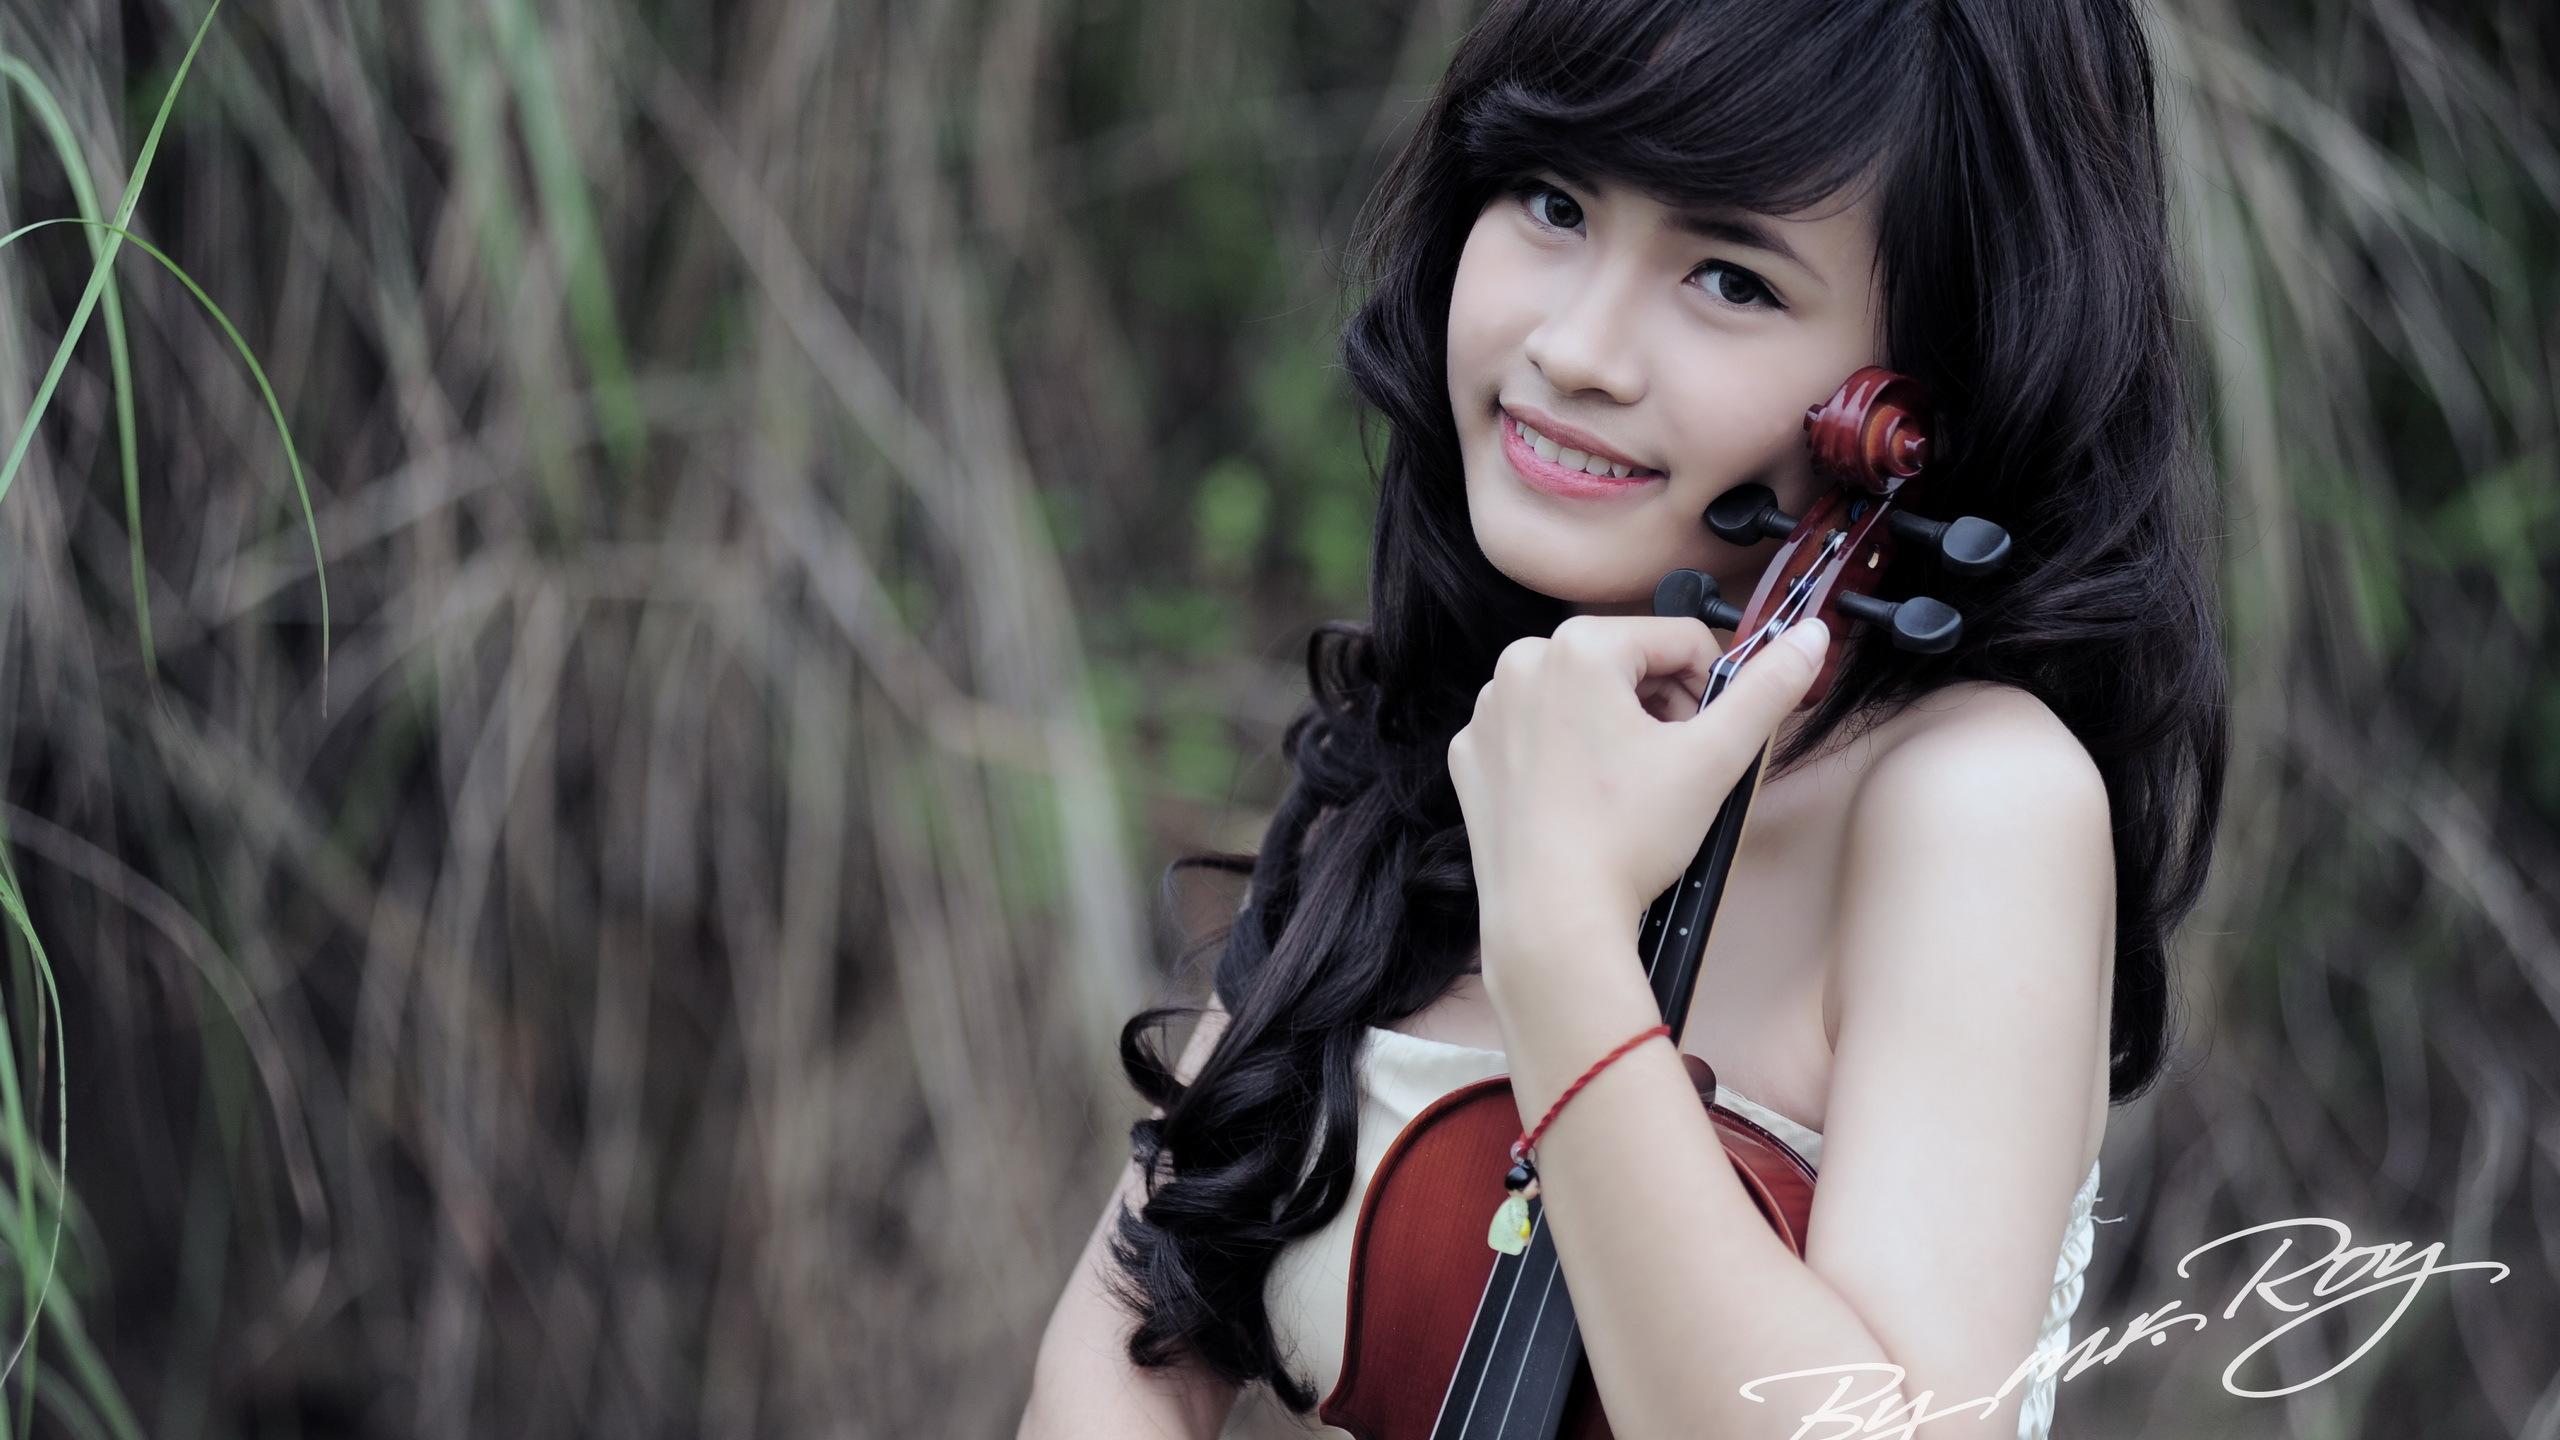 Girl with violin wallpaper and image, picture, photo